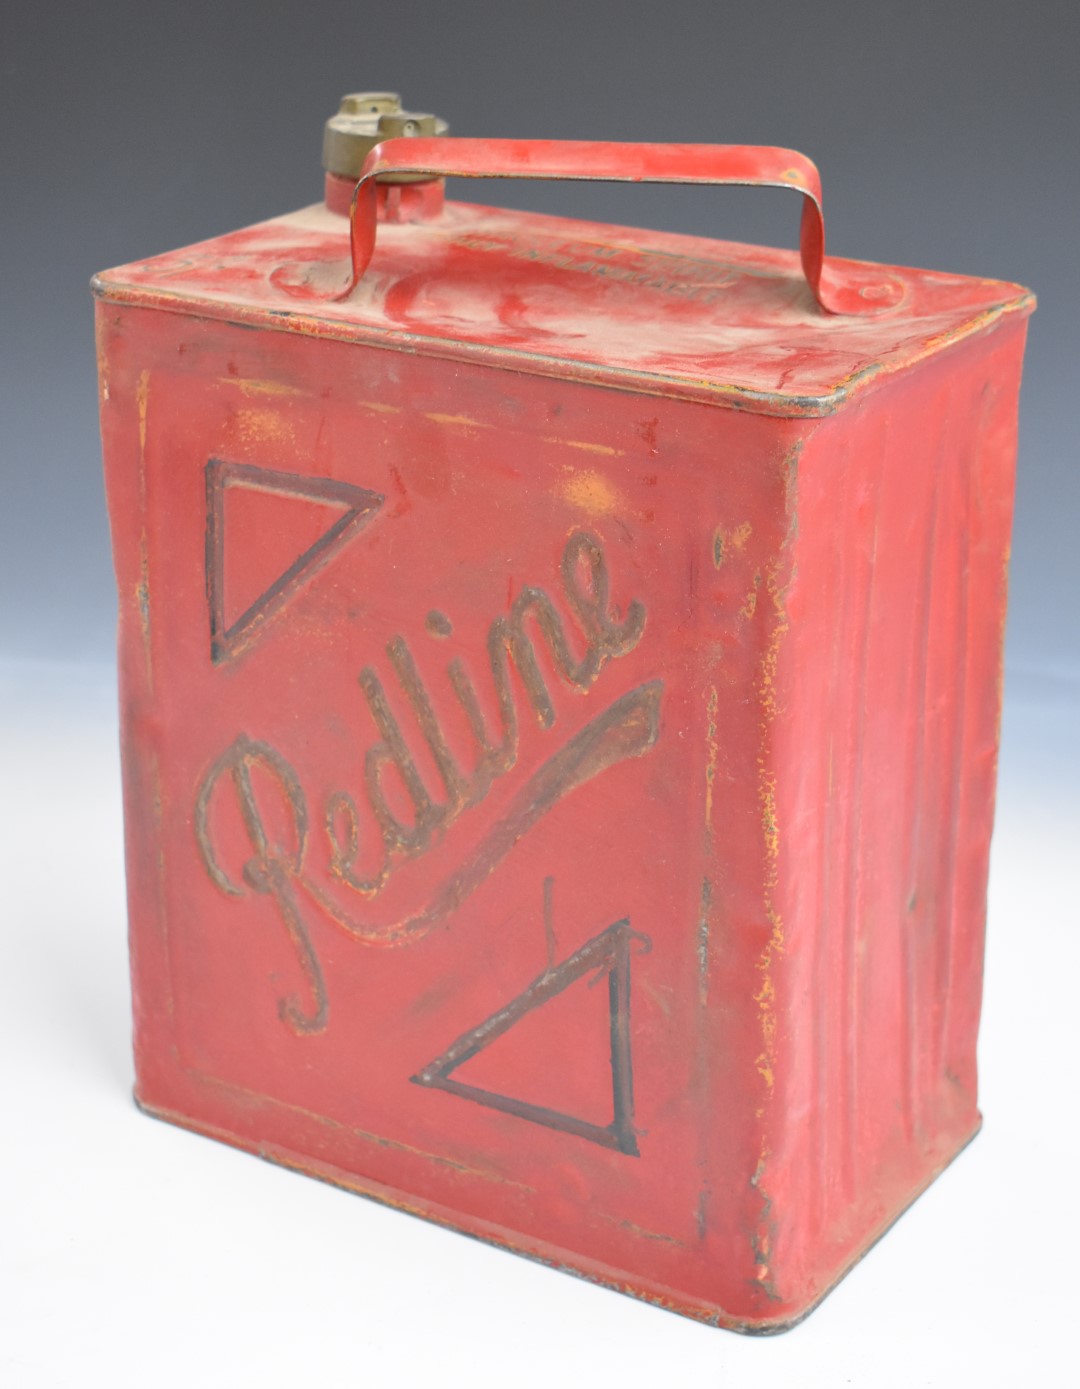 Two vintage 2 gallon vintage car petrol cans comprising Shell Aviation (1934) and Redline (1939), - Image 2 of 5